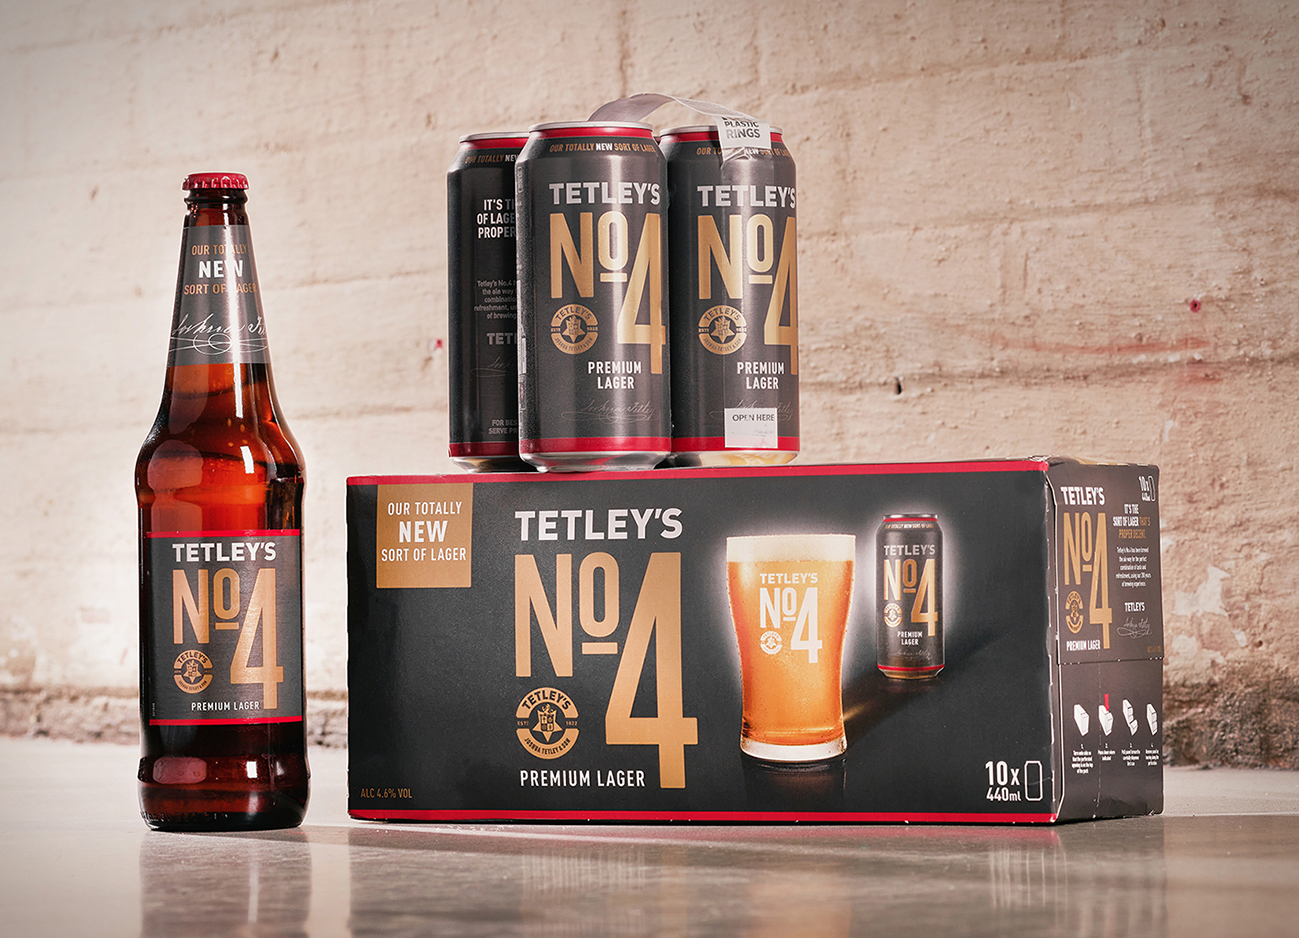 Fun Agency Cheers Creation of Tetley’s First Ever Premium Lager